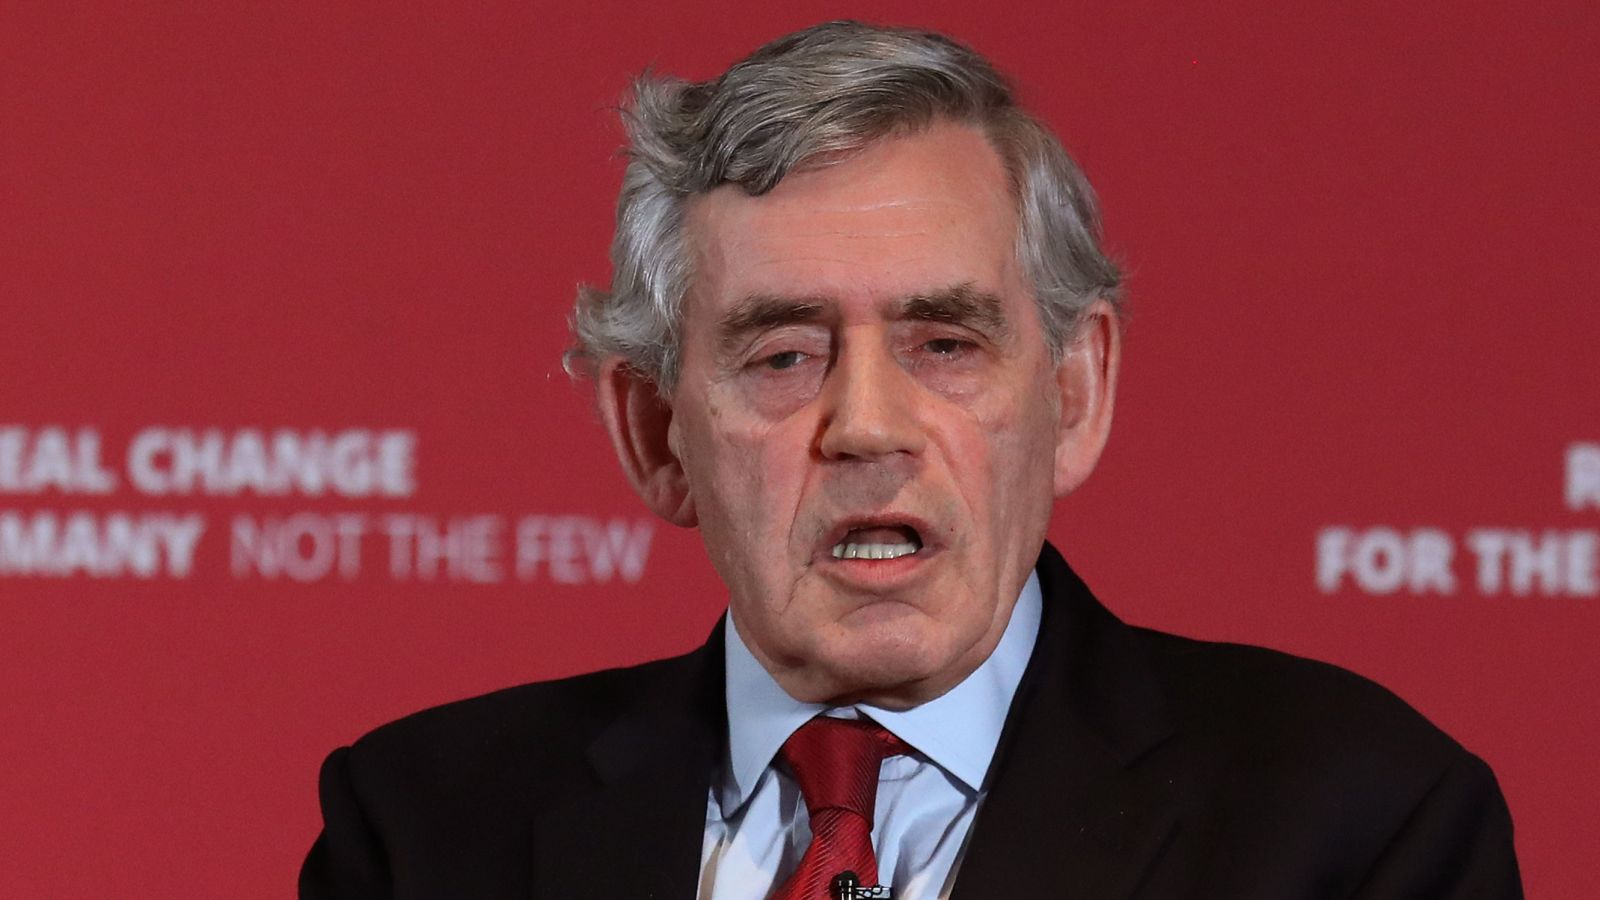 Gordon Brown says the government can raise billions of pounds from banks